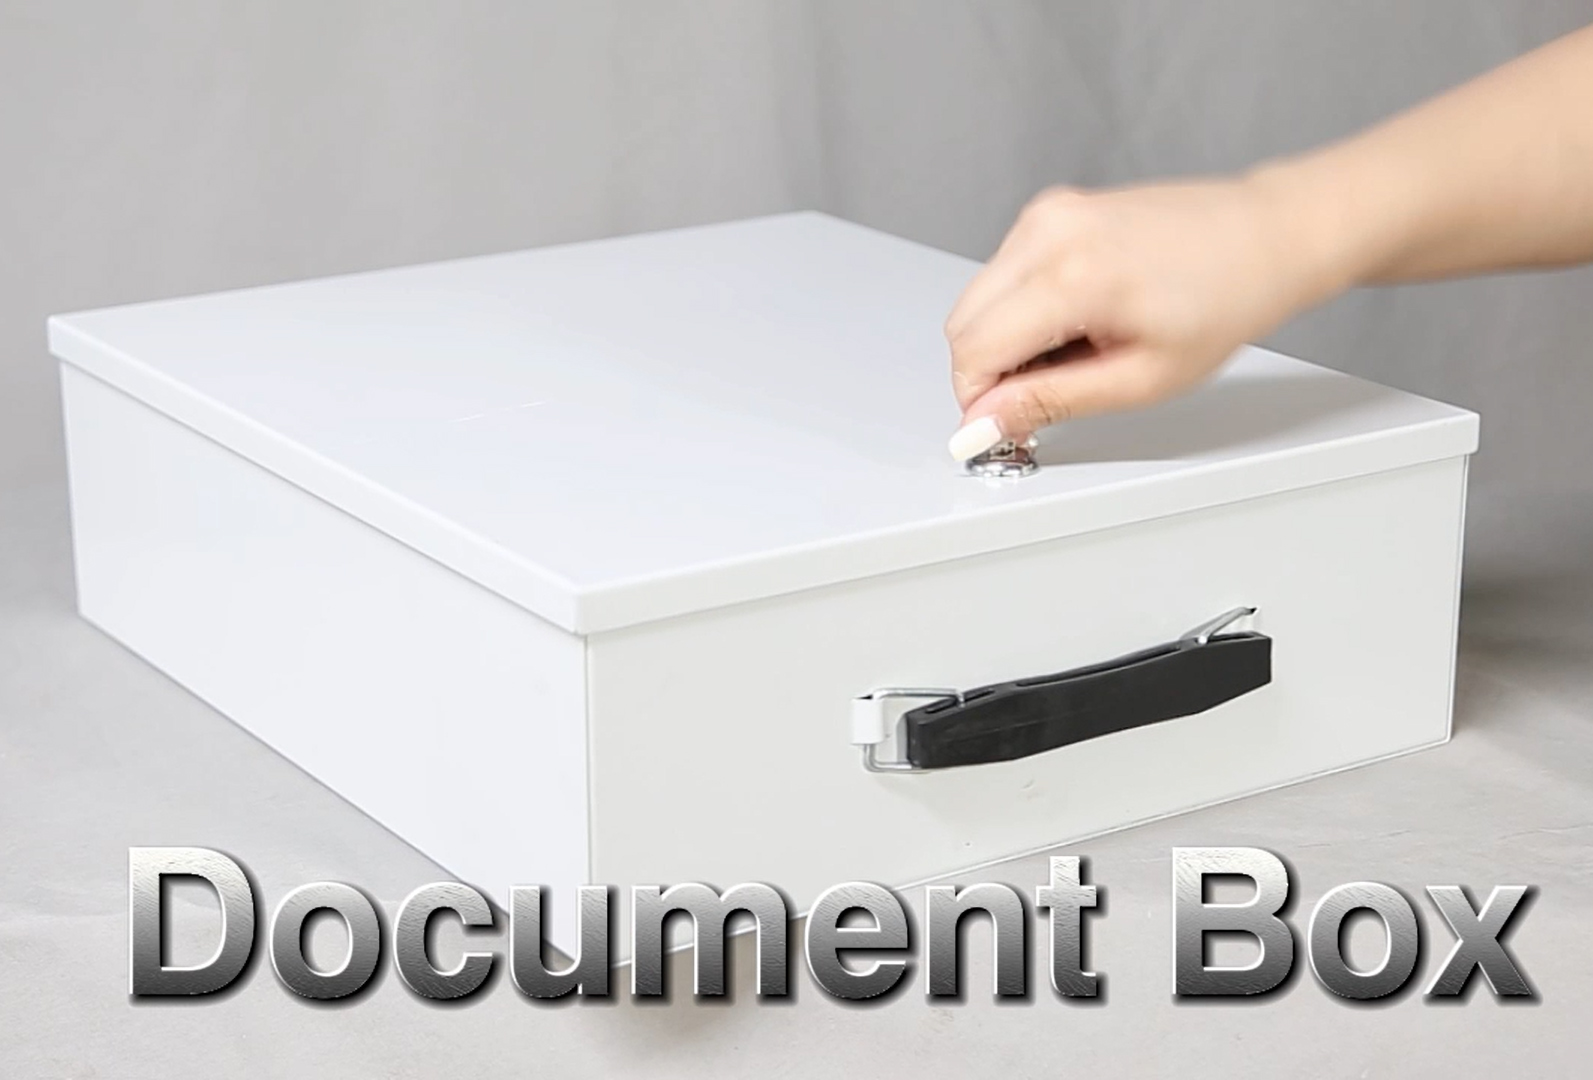 Step into a world of streamlined organization with our innovative File Management Box